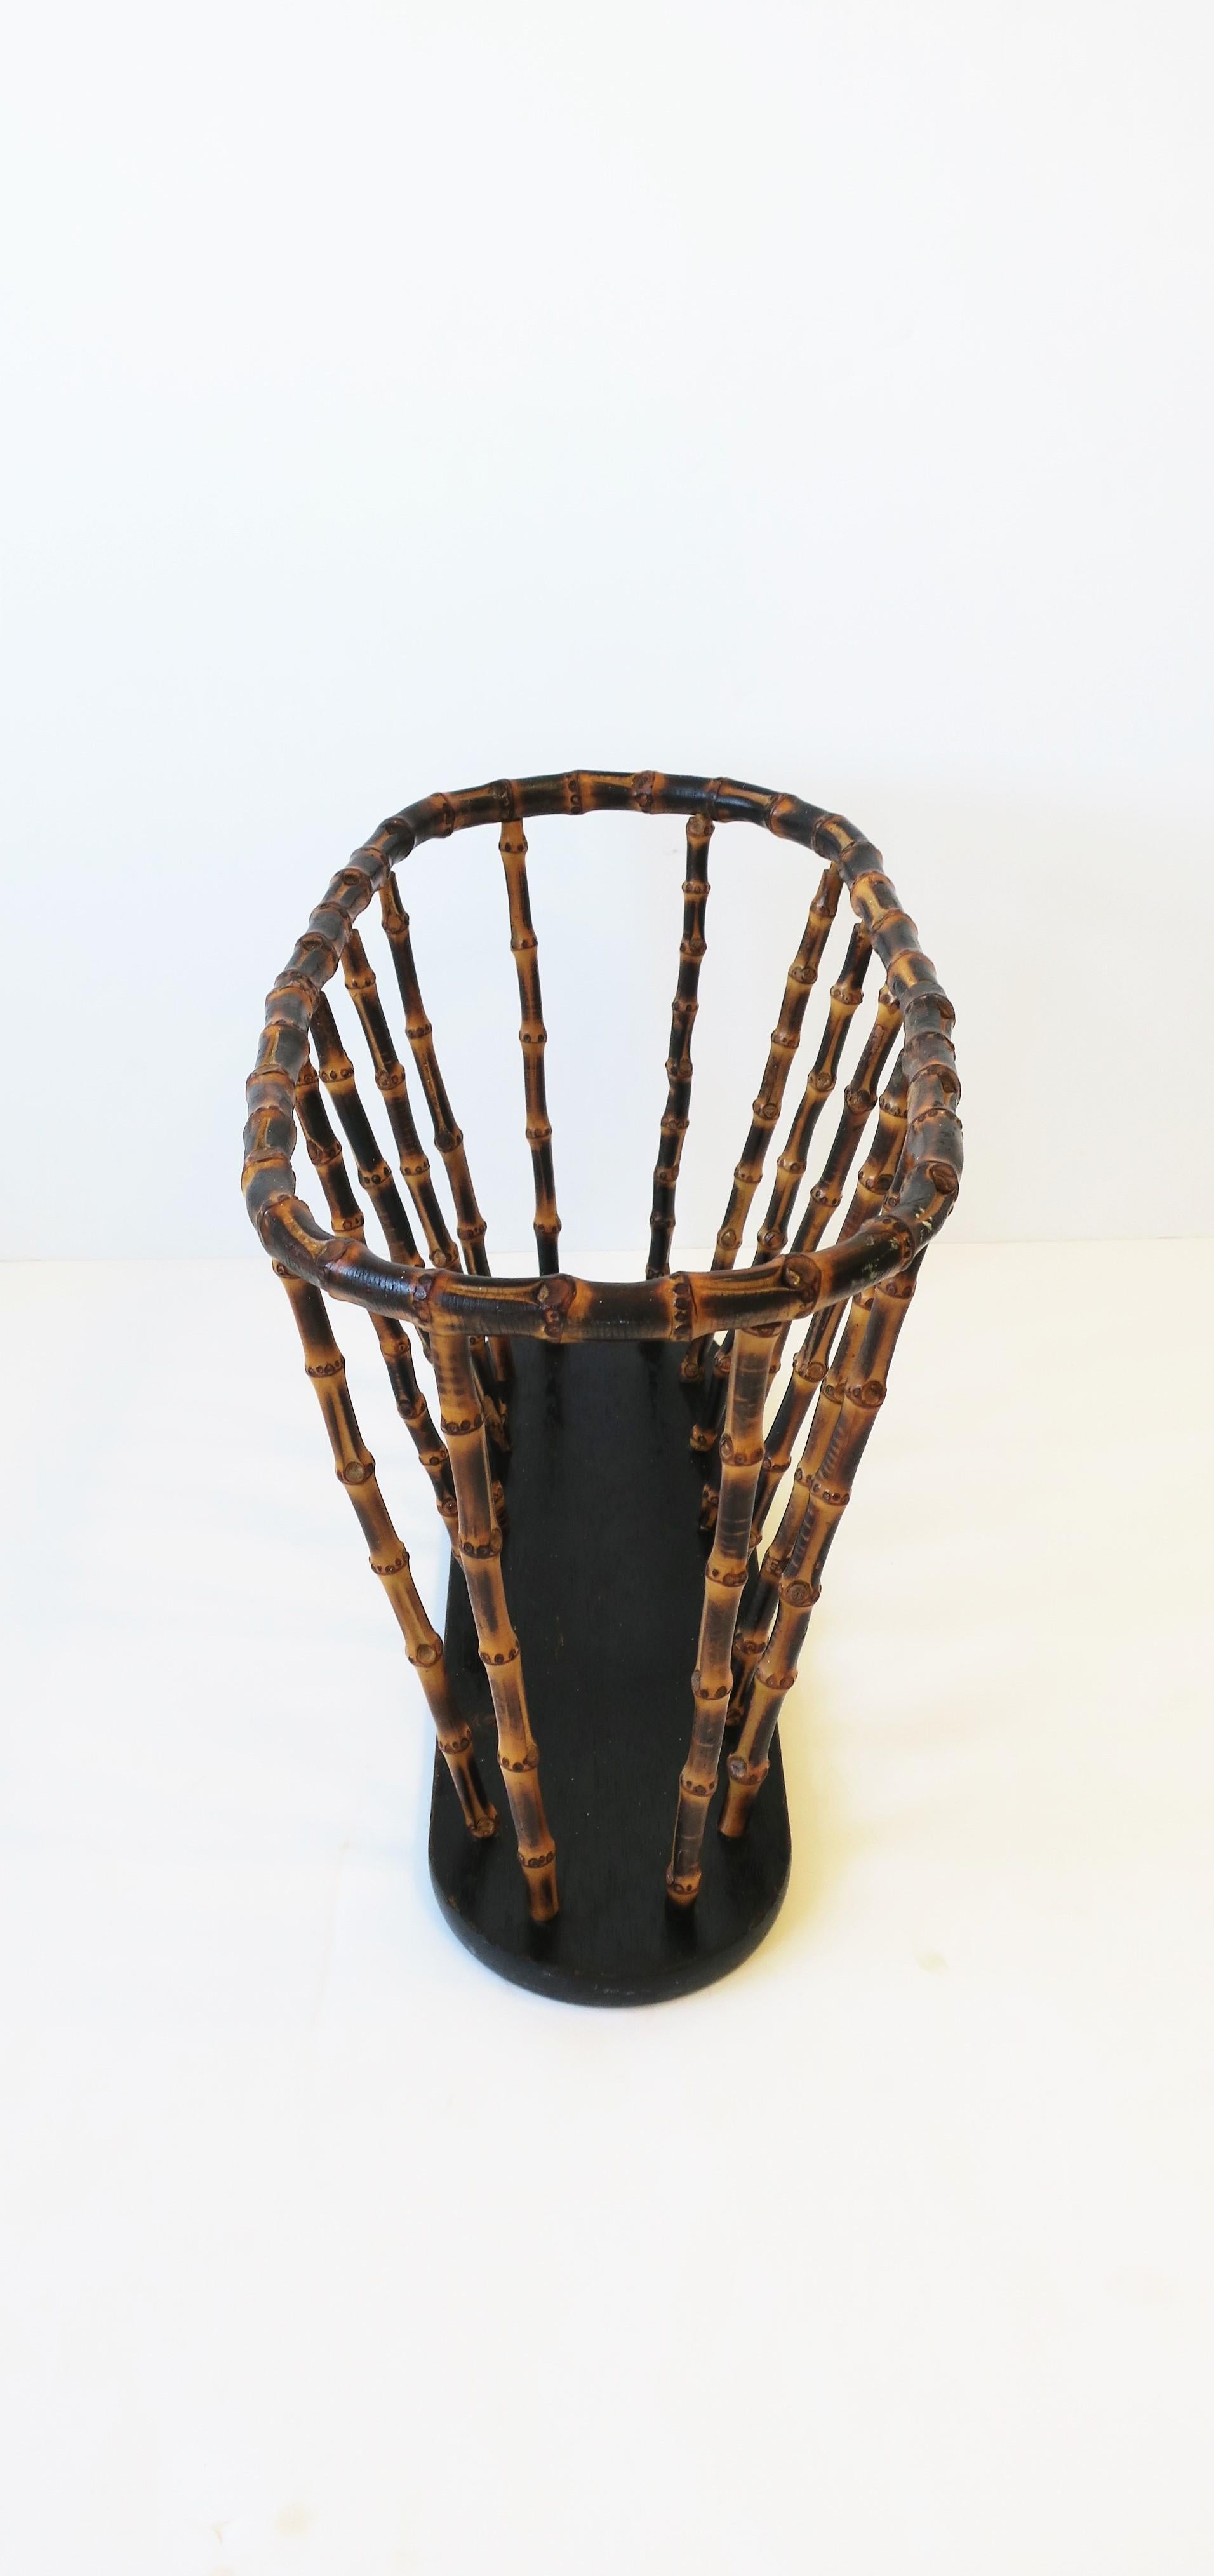 Bamboo Magazine or Newspaper Holder Stand Rack Basket in the style of Gucci 1